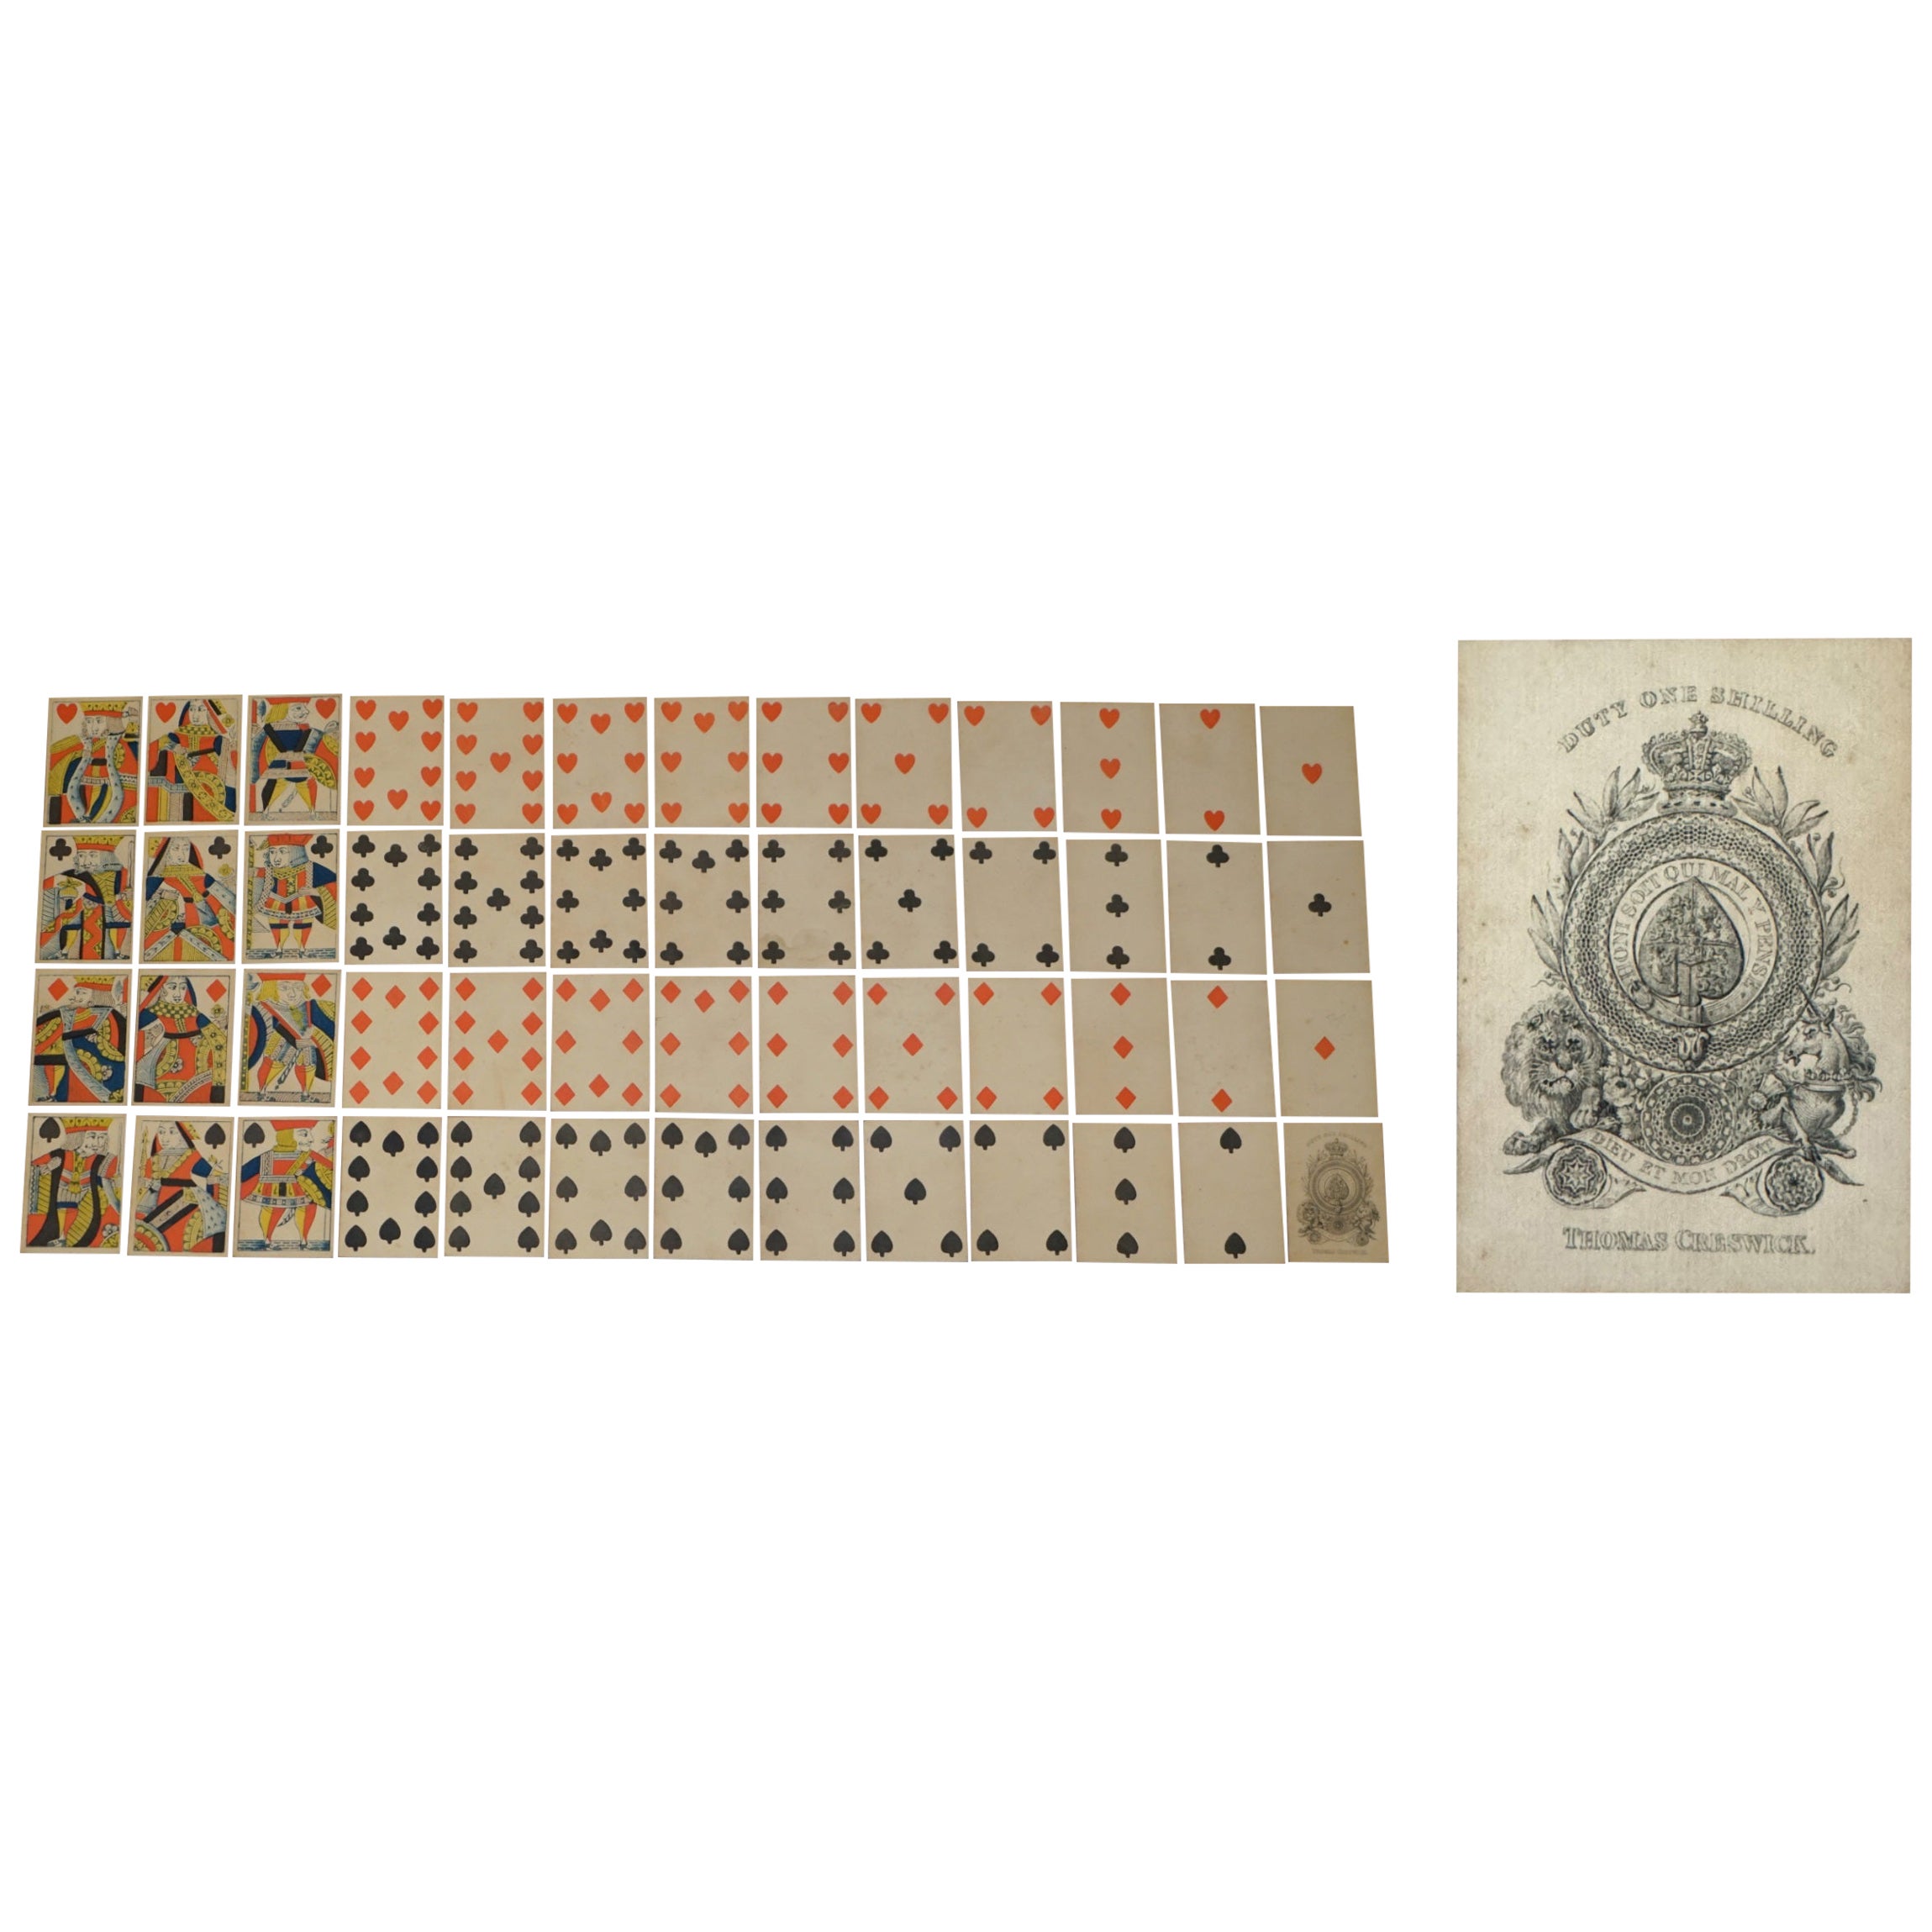 ANTIQUE 1830 THOMAS CRESWICK GEORGIAN PLAYiNG CARDS WITH FIZZLE ACE OF SPADES For Sale